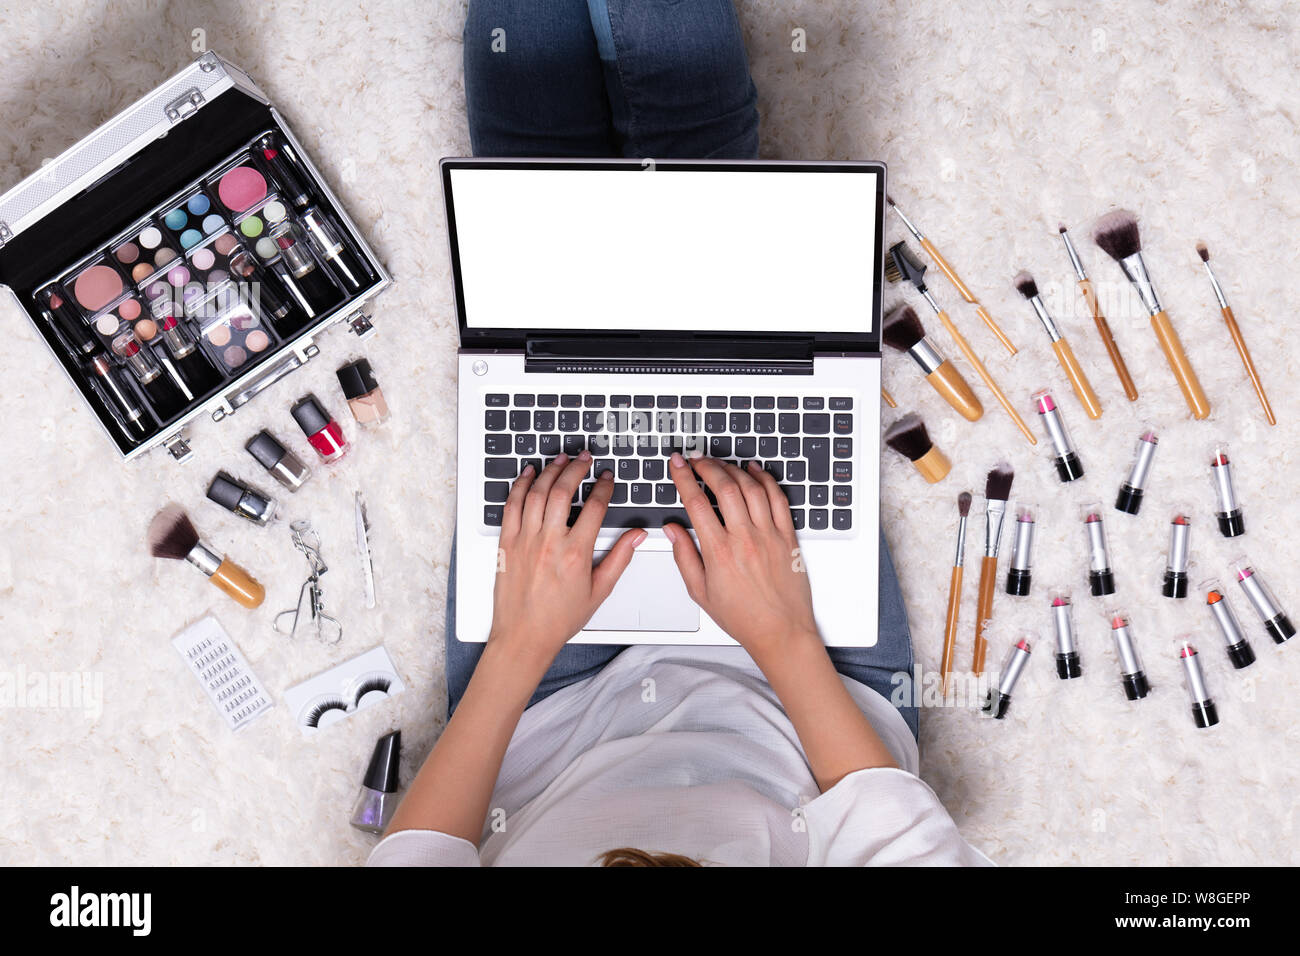 An Overhead View Of Woman Sitting On Rug While Using Laptop Near Beauty Product Stock Photo